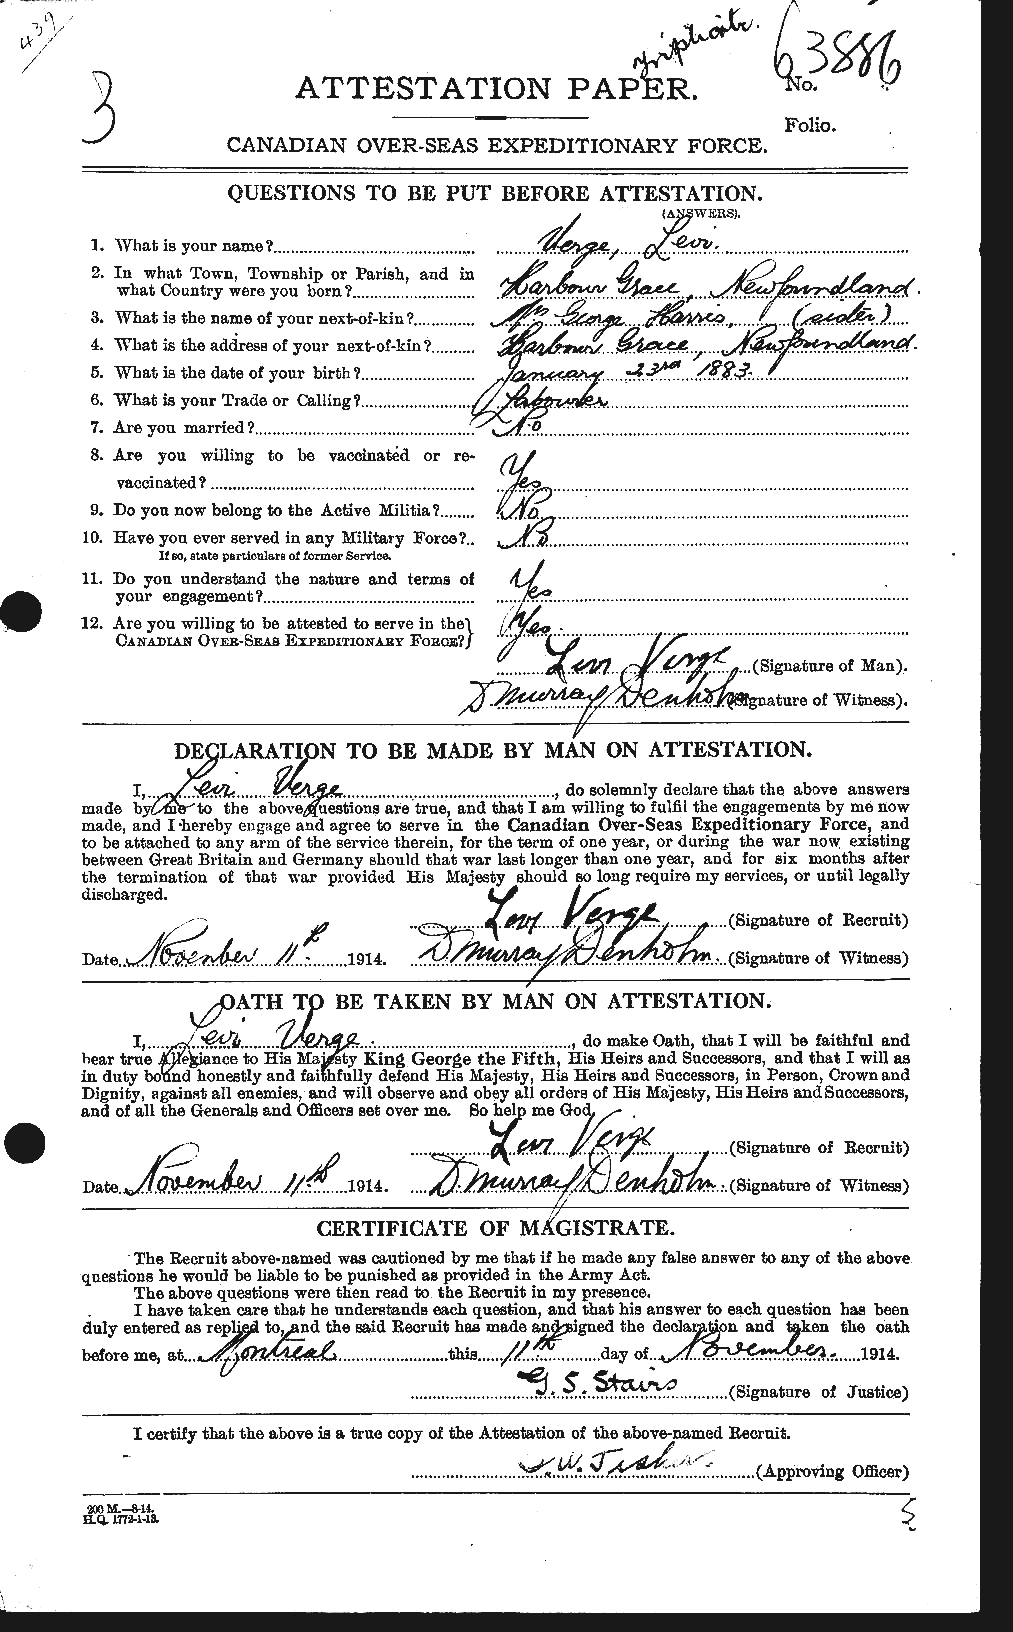 Personnel Records of the First World War - CEF 649468a